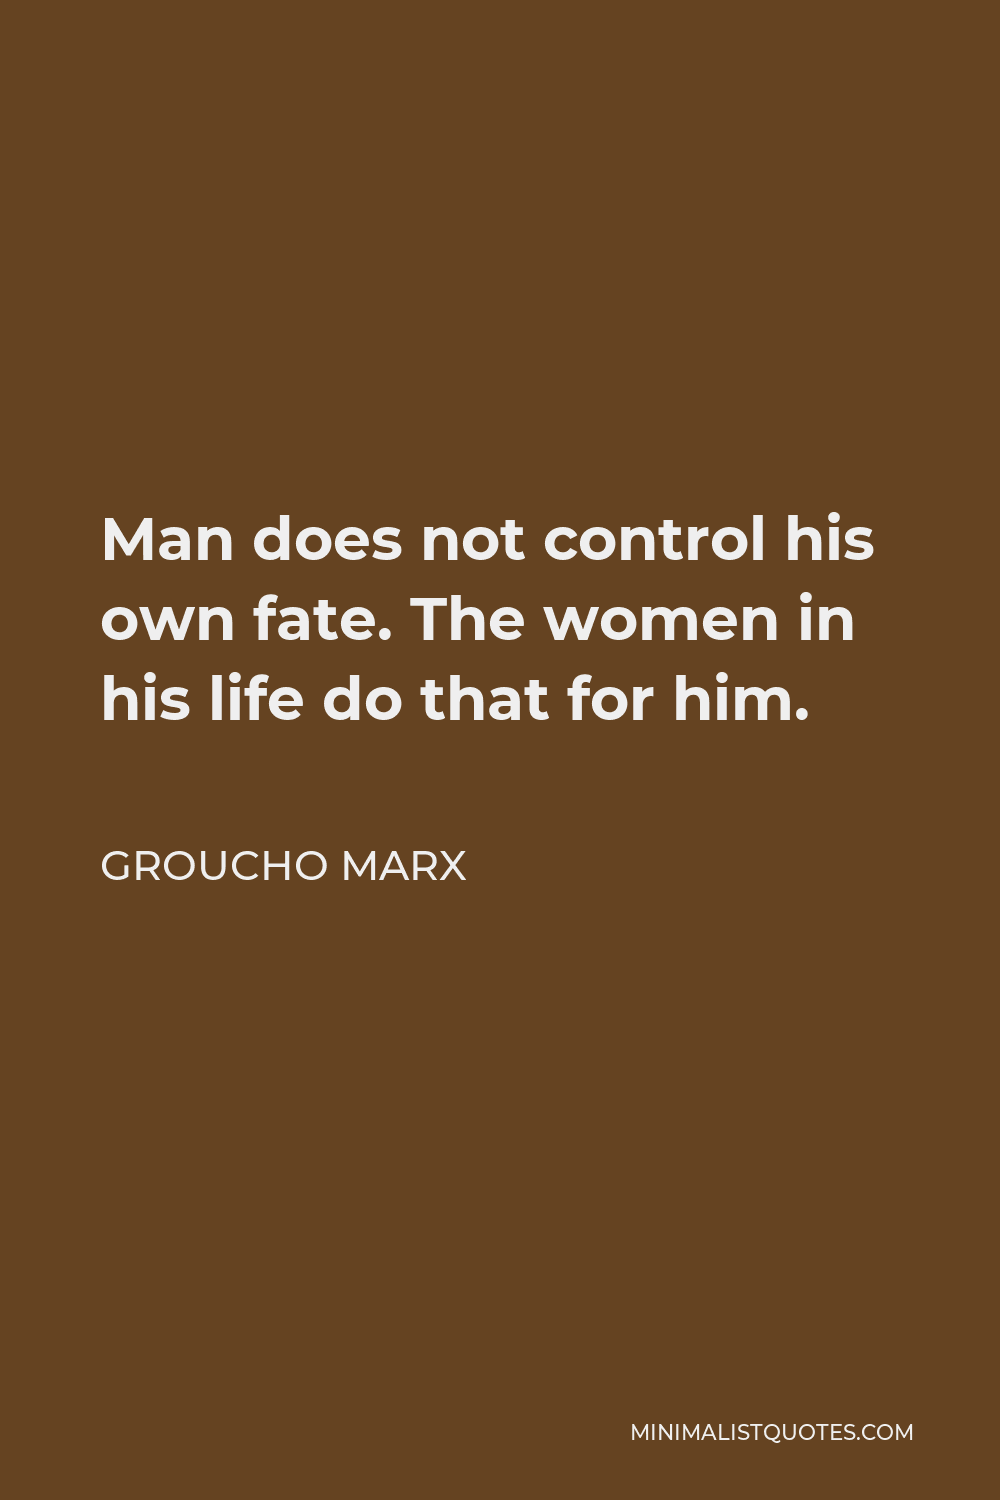 Groucho Marx Quote - Man does not control his own fate. The women in his life do that for him.